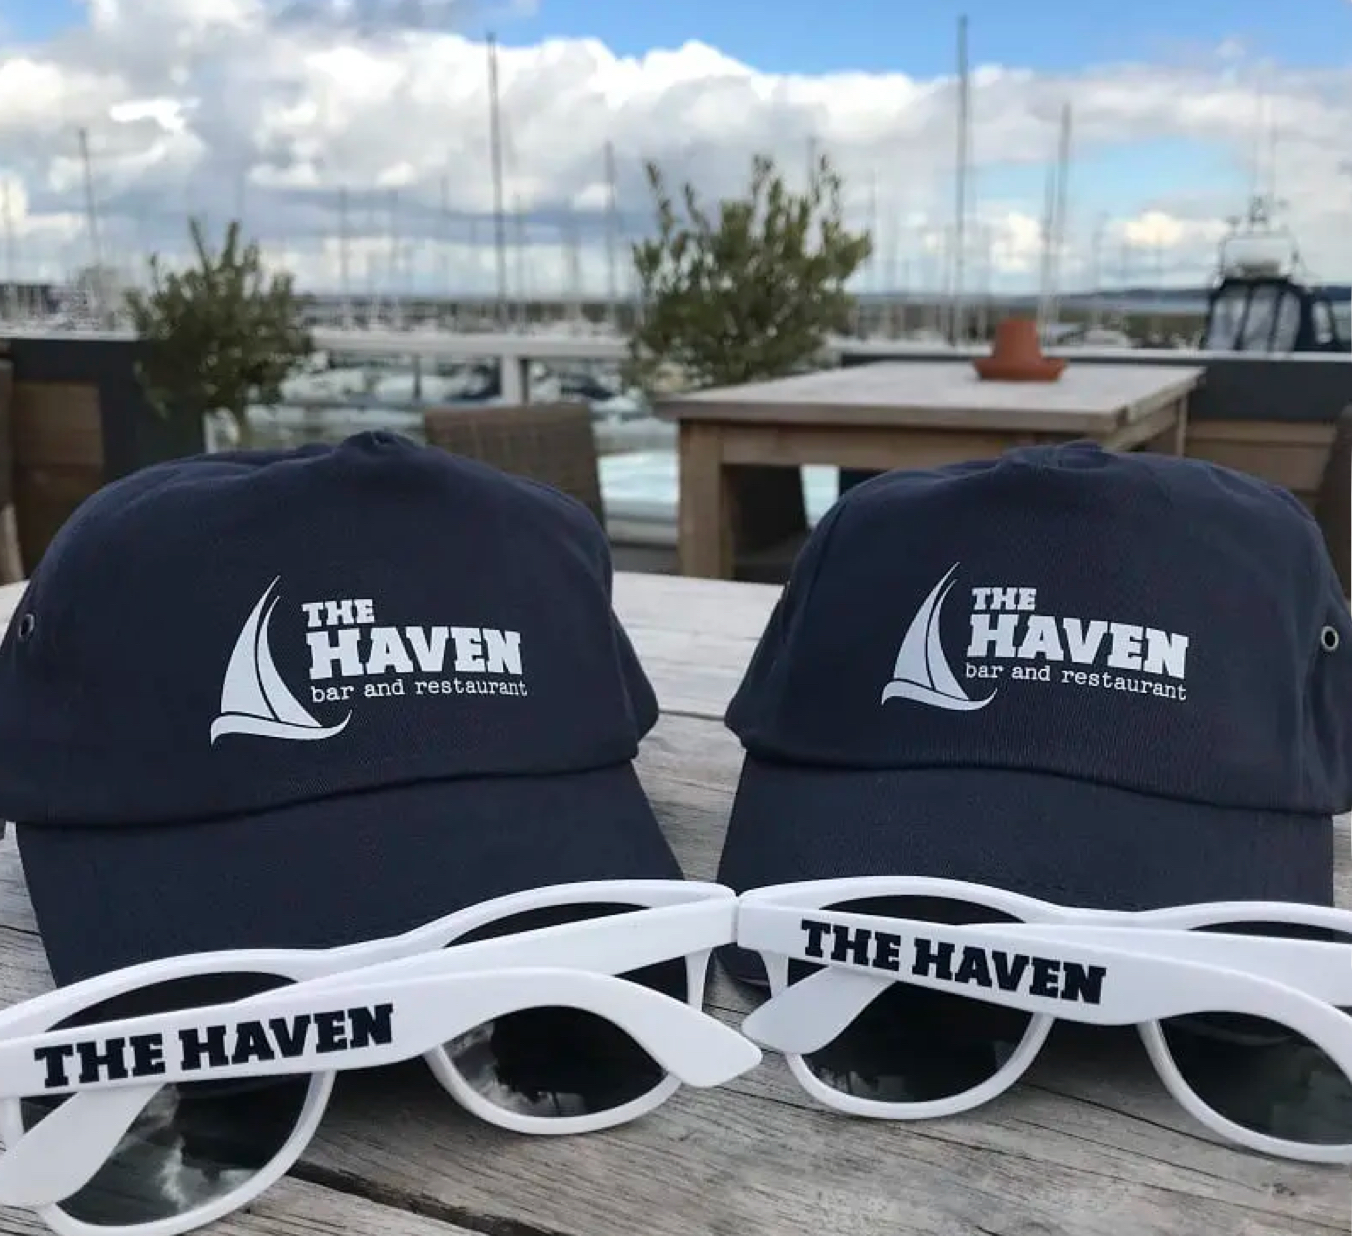 The Haven Bar and Restaurant sunglasses and caps.